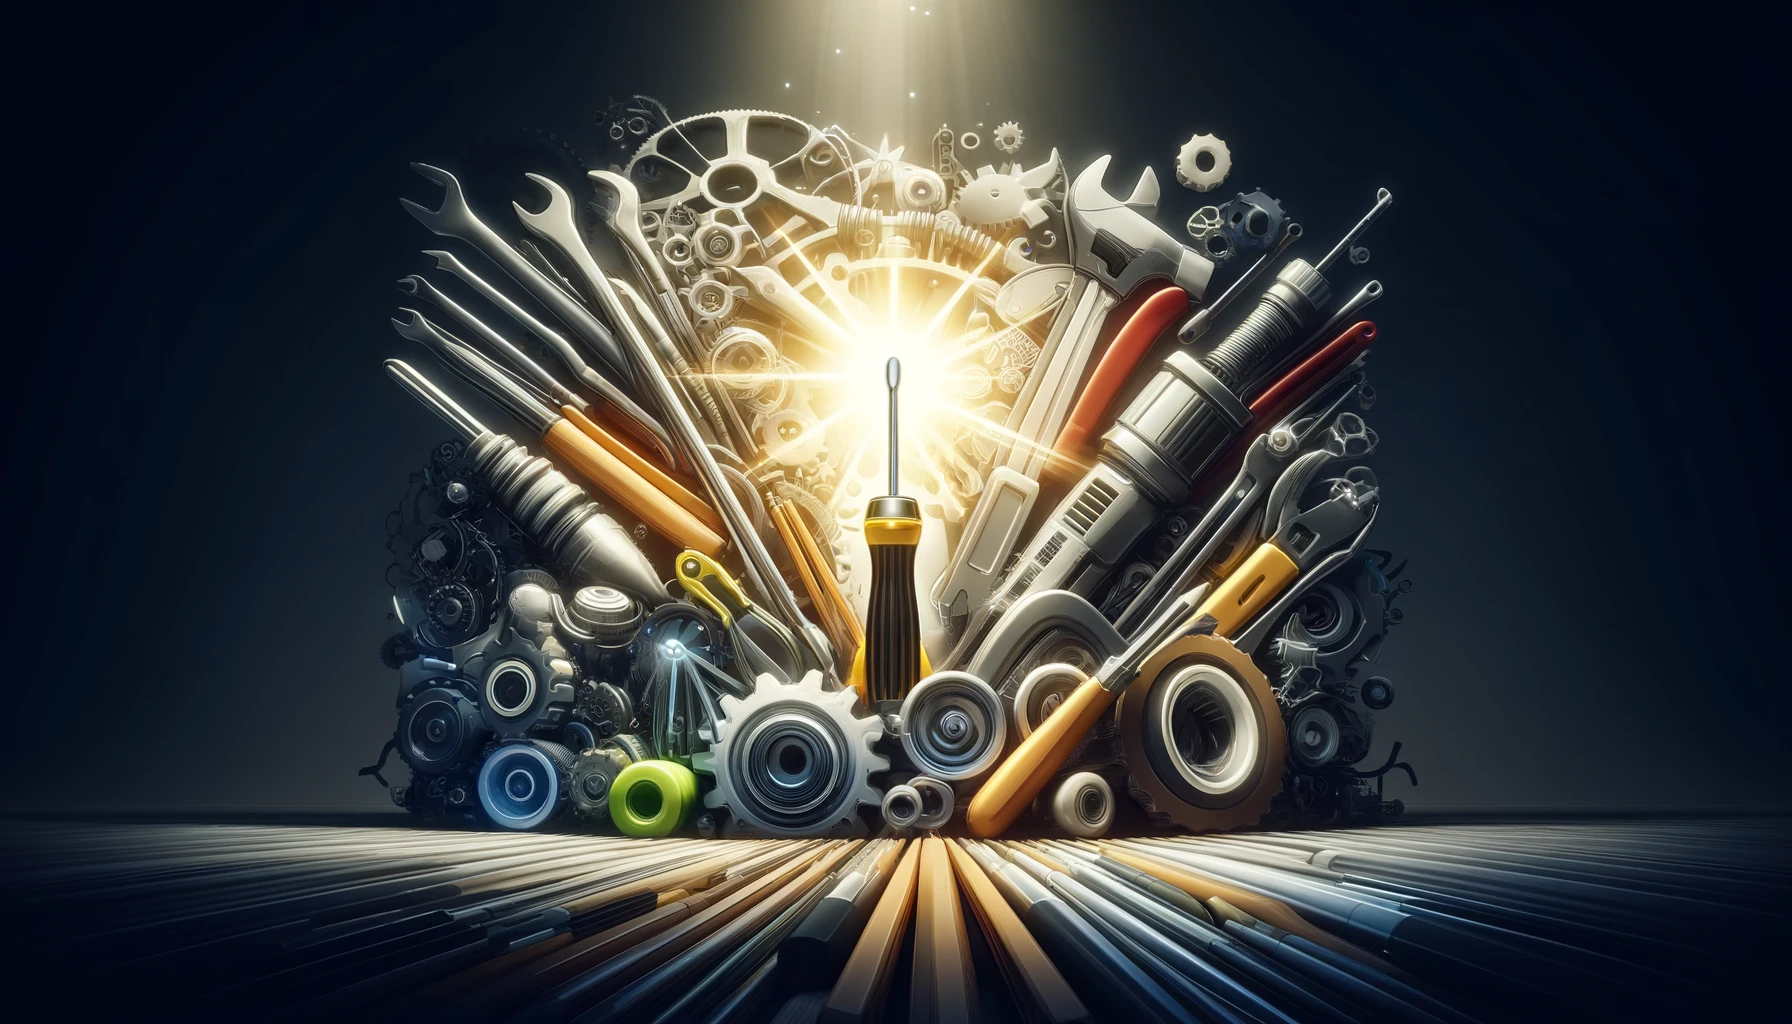 Illustration of a screw driver surrounded by other tools, tape, and gears.